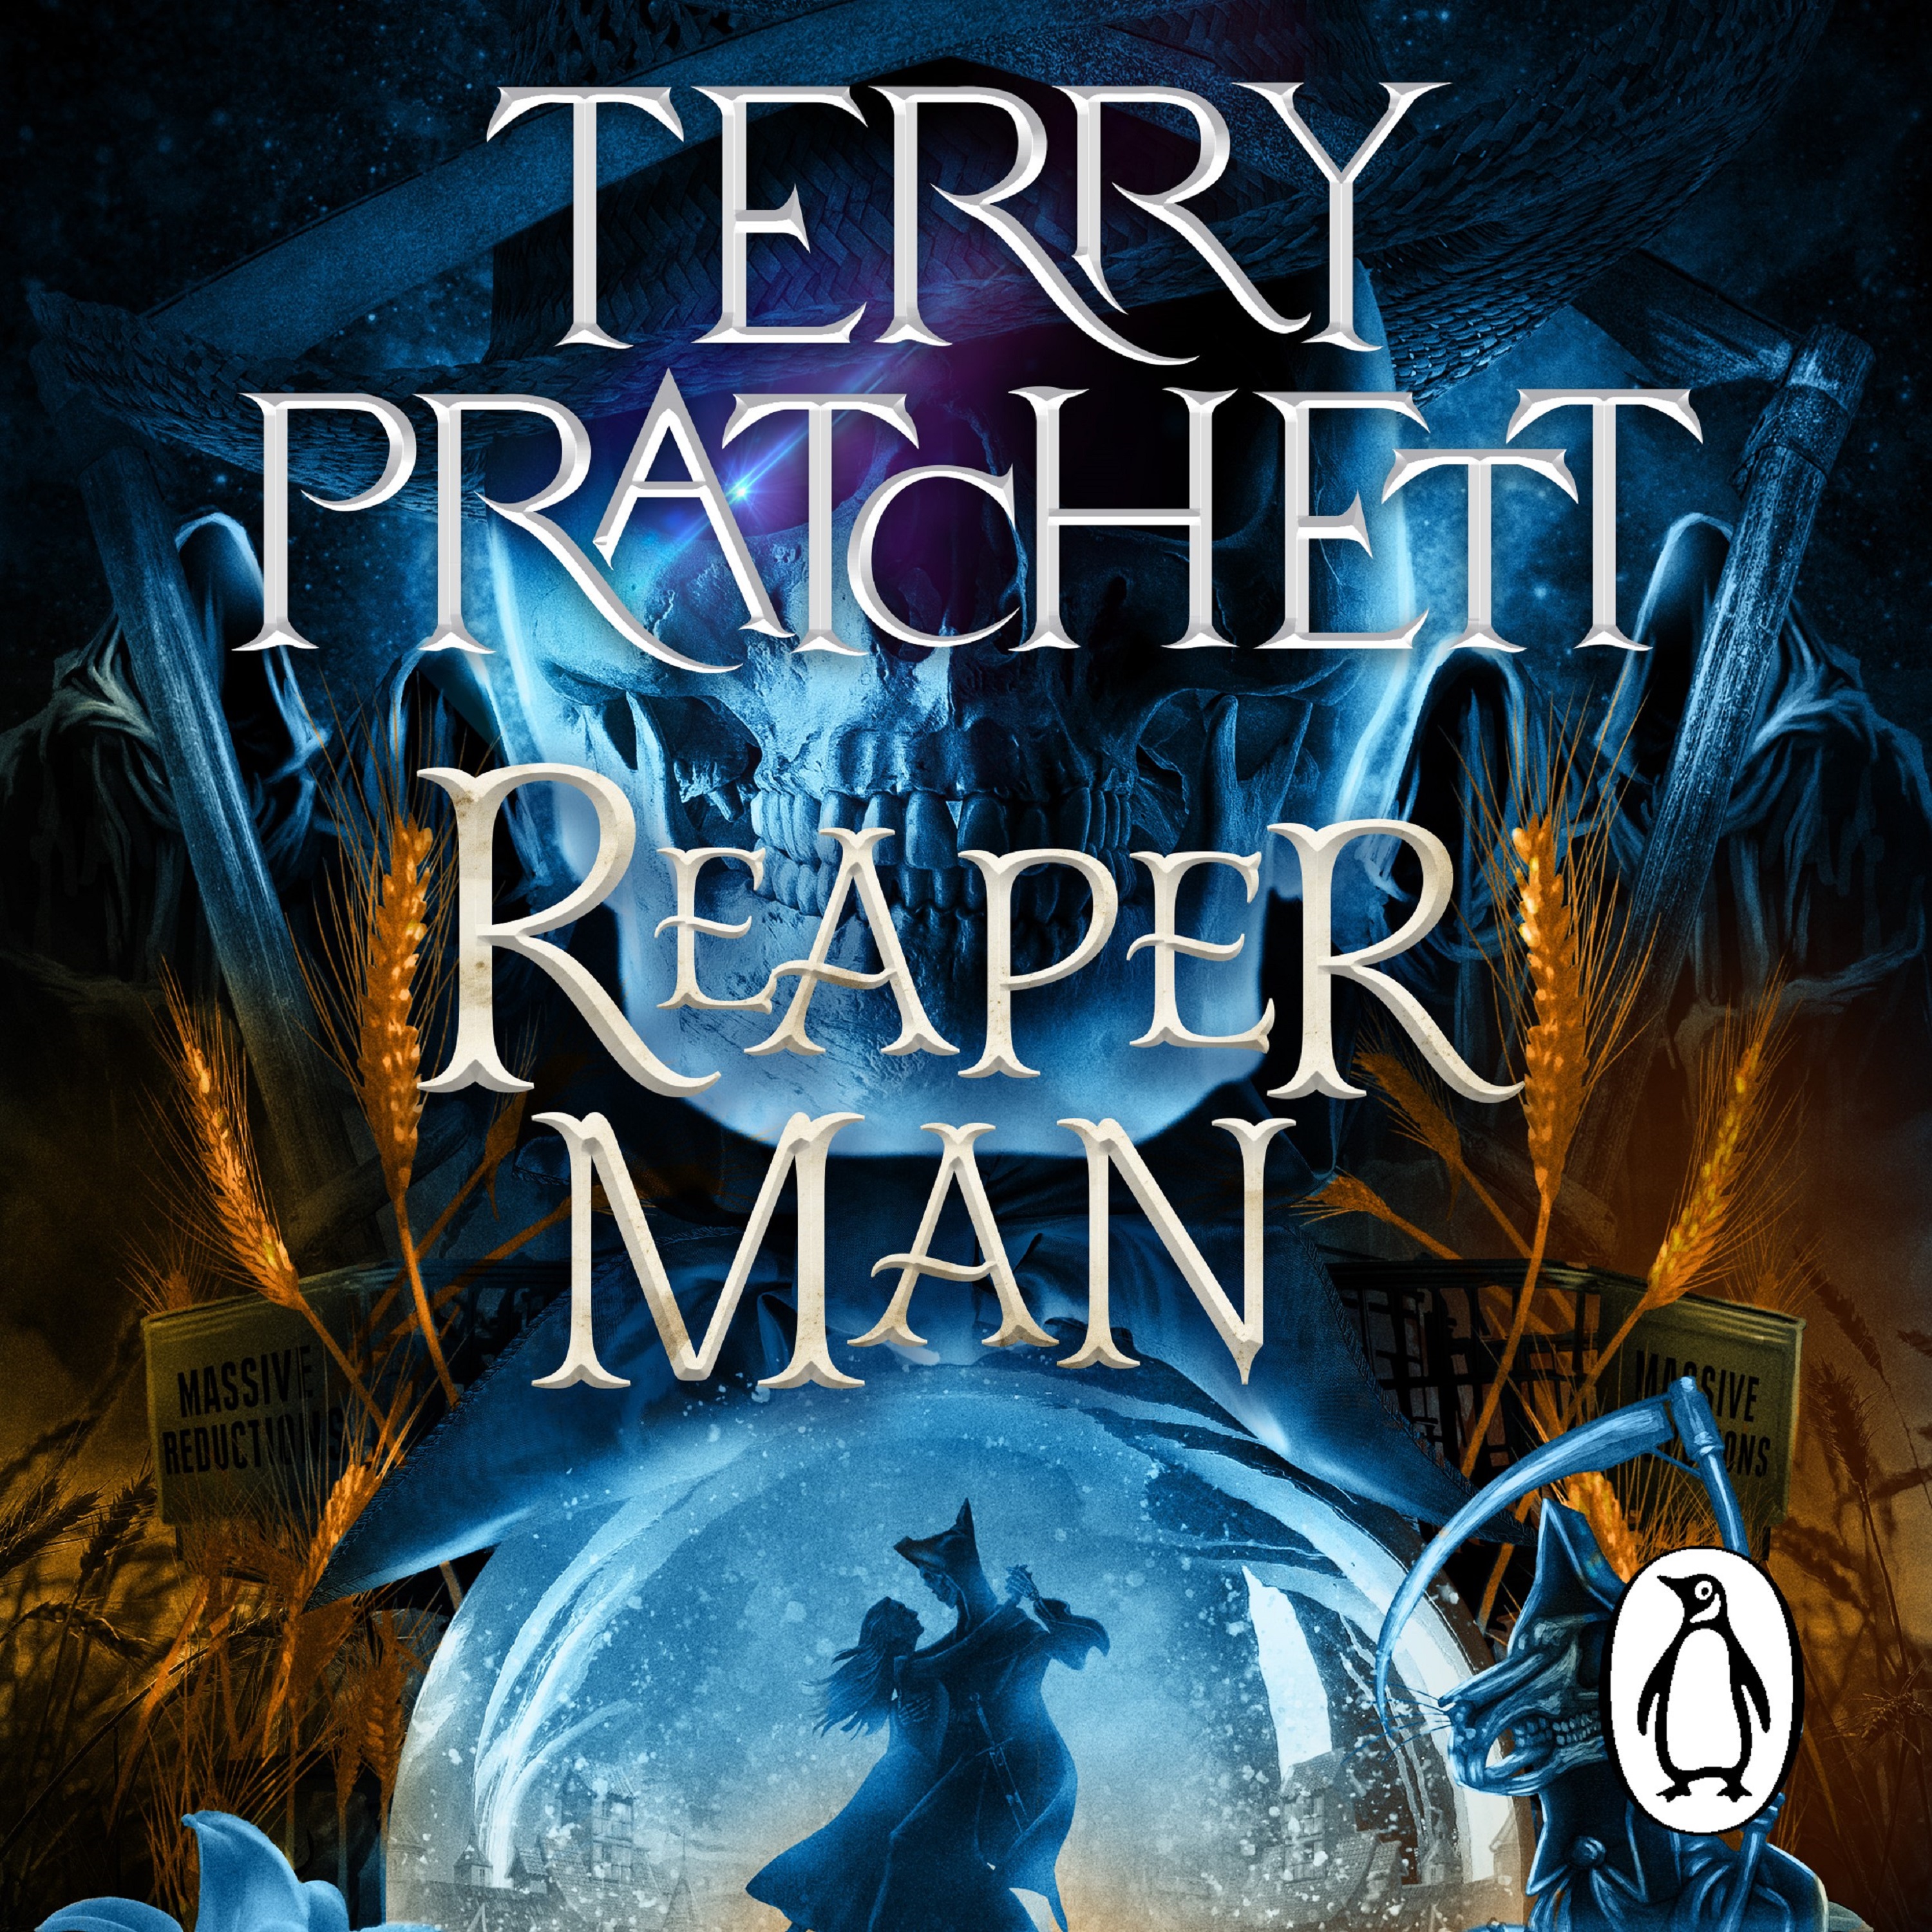 Audiobook image for Reaper Man: a blue colour palette. Death's face, wearing a straw hat and holding a scythe is in the background. At the bottom is a silhouette of a couple dancing. Terry Pratchett's name and the title are in large silver font across the centre.